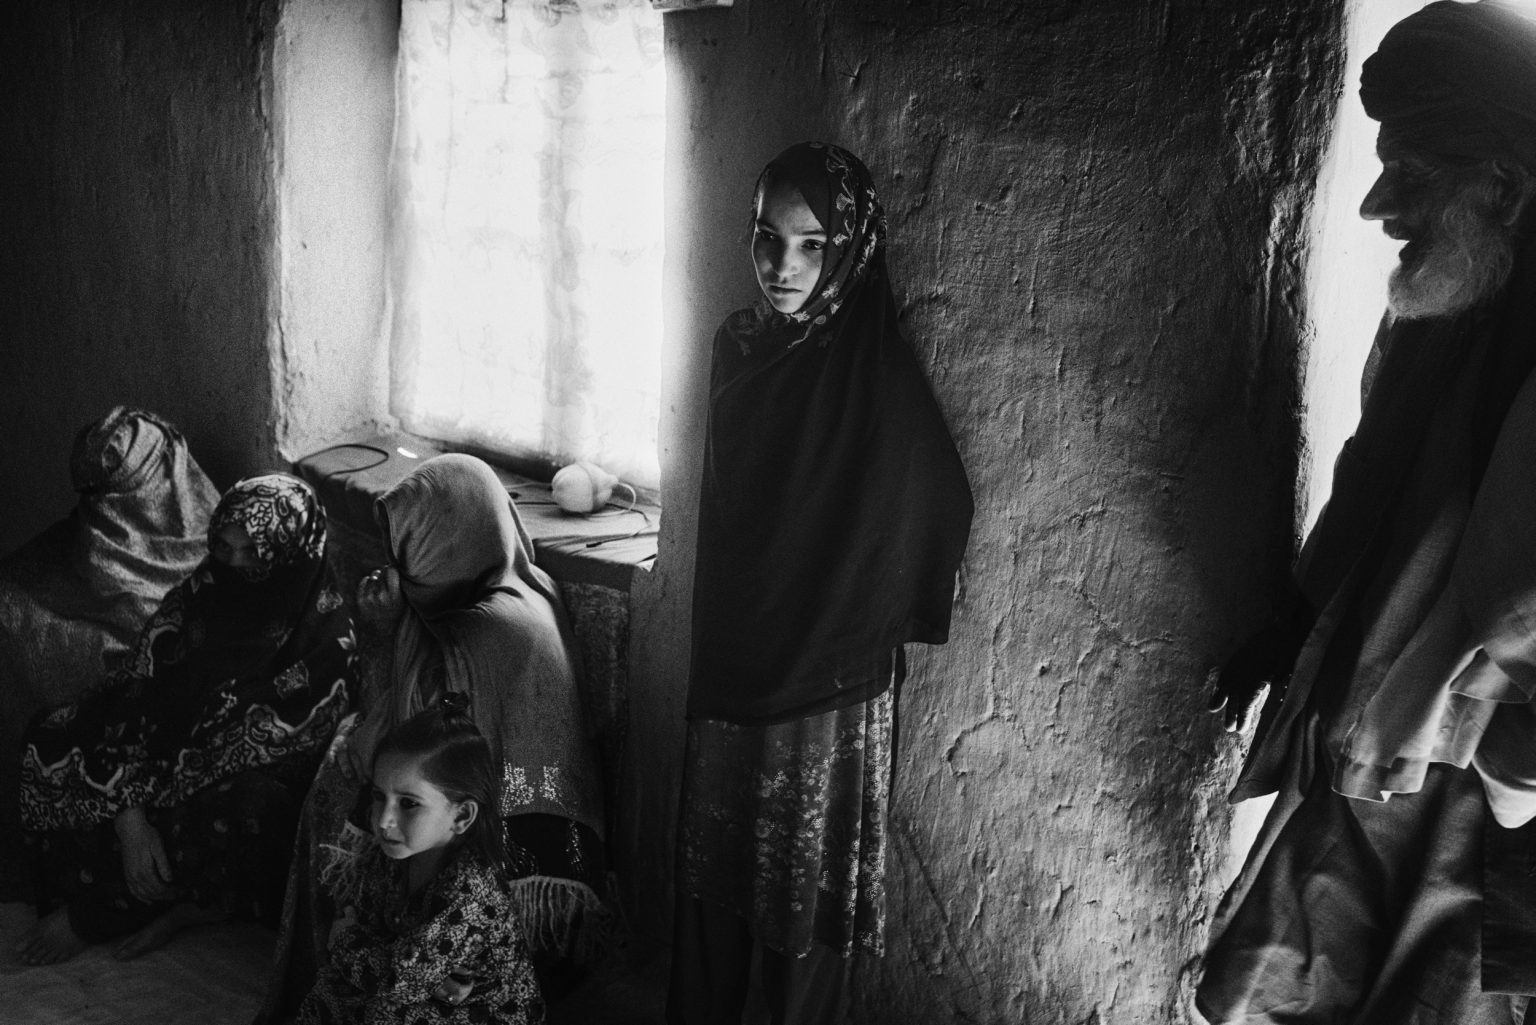 LASHKAR GHA, AFGHANISTAN - MAY 26, 2021:
Civilian take shelter inside a house in Helmand while fighting between the Taliban and the Afghan security forces rages nearby. 
Some civilians returned to their houses in the district of Nawa, near the city of Lashkar Gha despite fighting still ongoing in the area.
After American troops began leaving Afghanistan early May the Taliban mounted an offensive near the southern city of Lashkar Gha. Afghan security forces were struggling to hold the besieged city in Helmand province.

(Photo by Lorenzo Tugnoli/ Washington Post/ Contrasto)